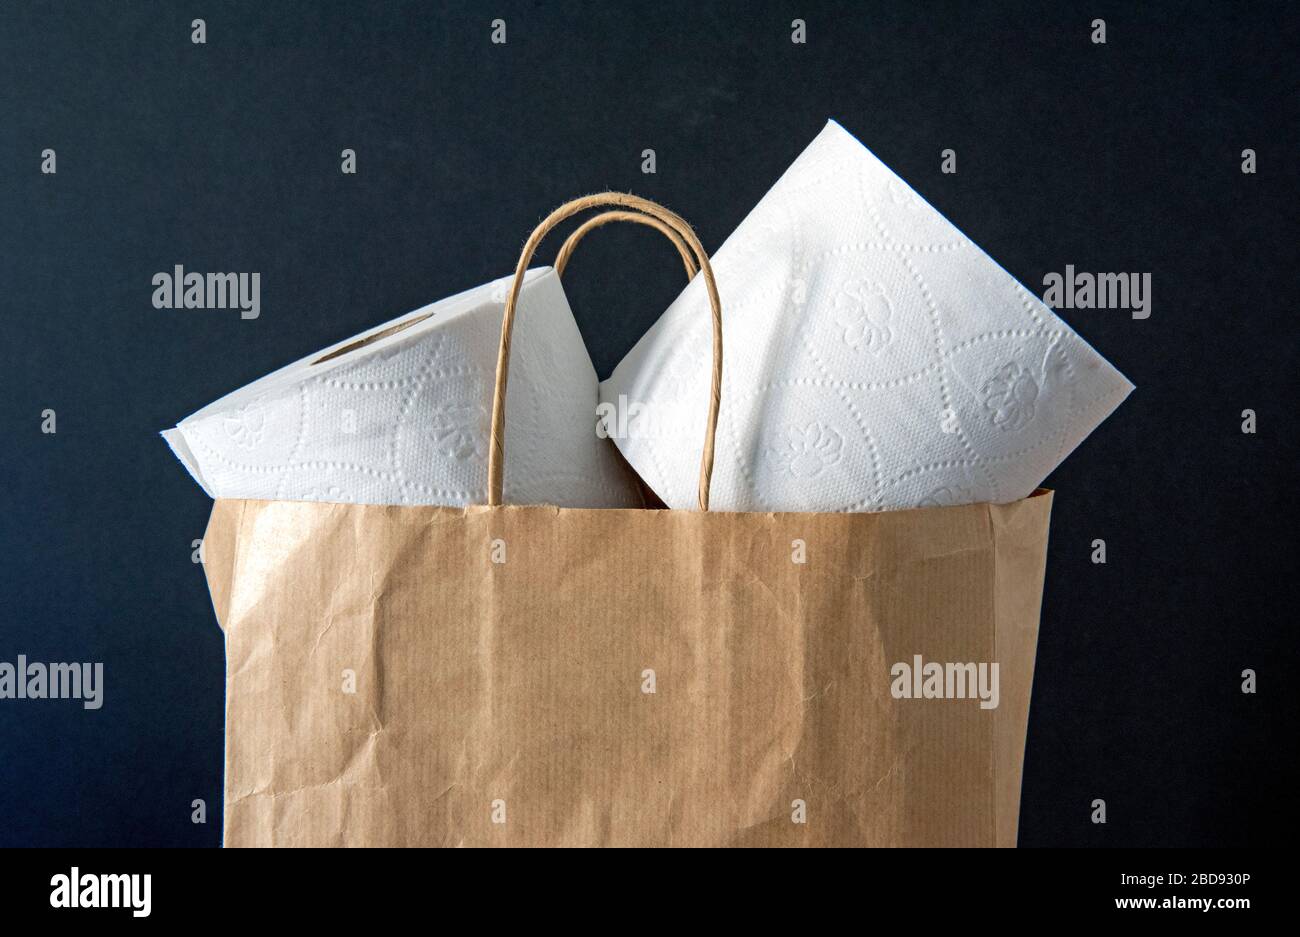 Recycled toilet rolls paper loose in brown paper carrier bag against black background. Zero waste concept Stock Photo